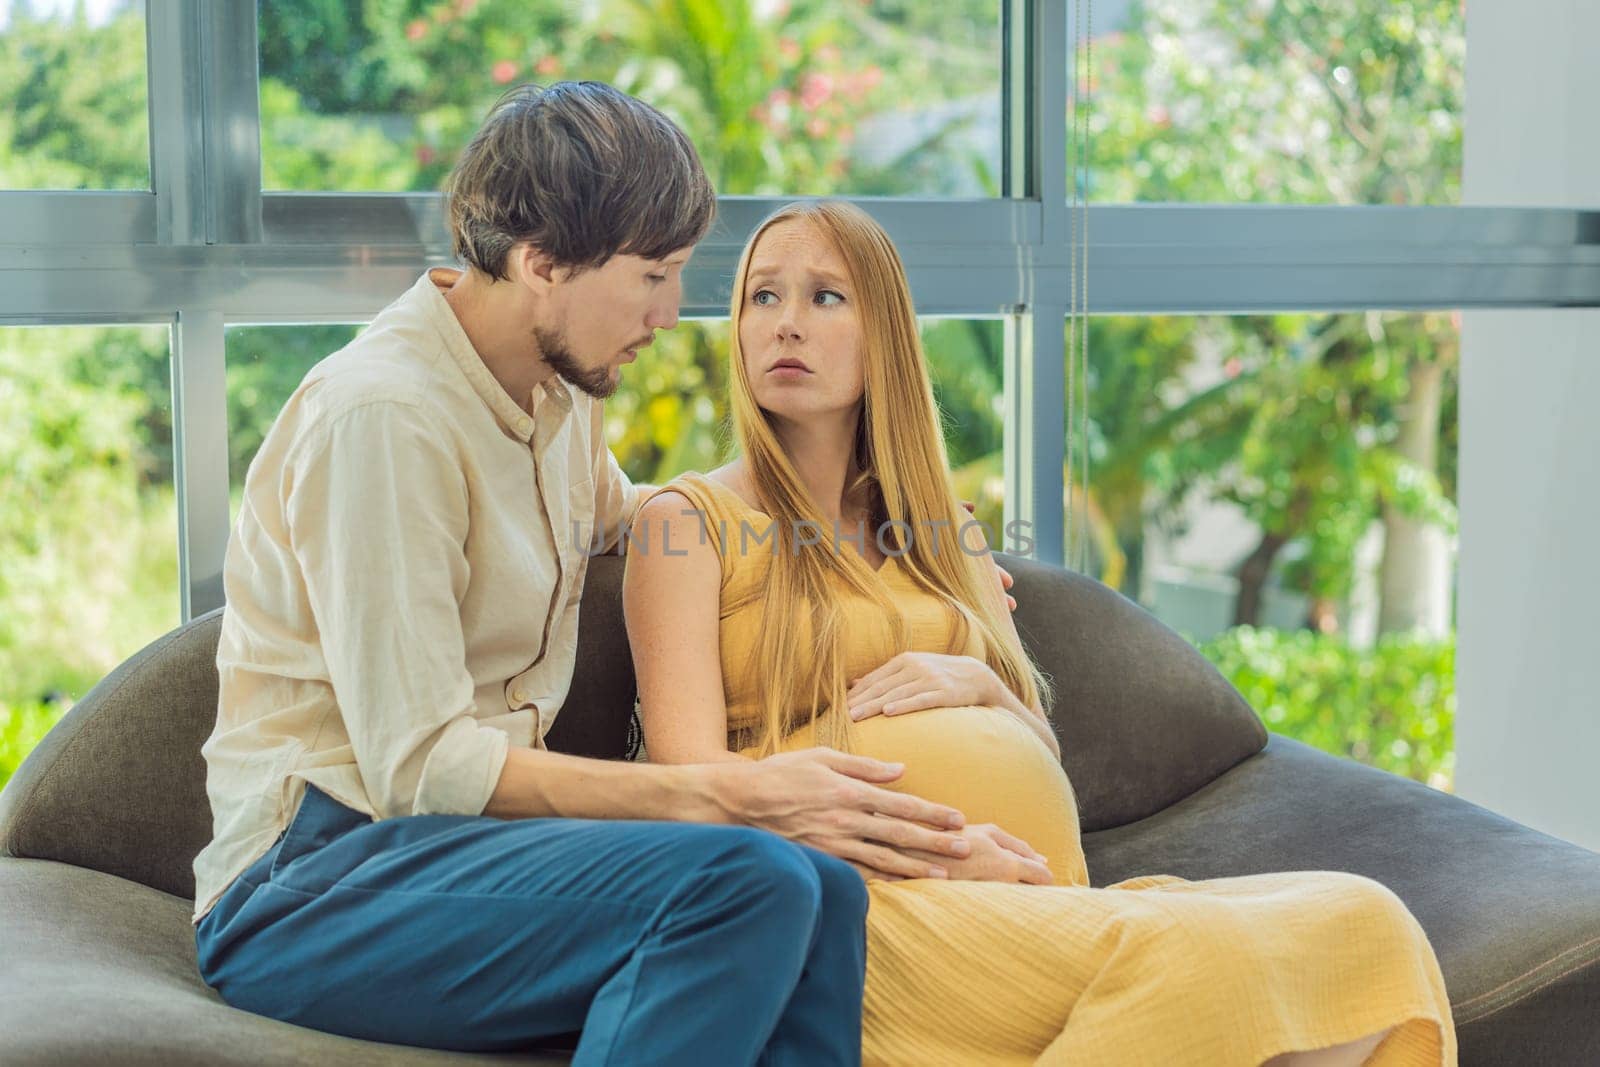 Expectant woman feels unwell, husband comforts and reassures her during a challenging pregnancy by galitskaya